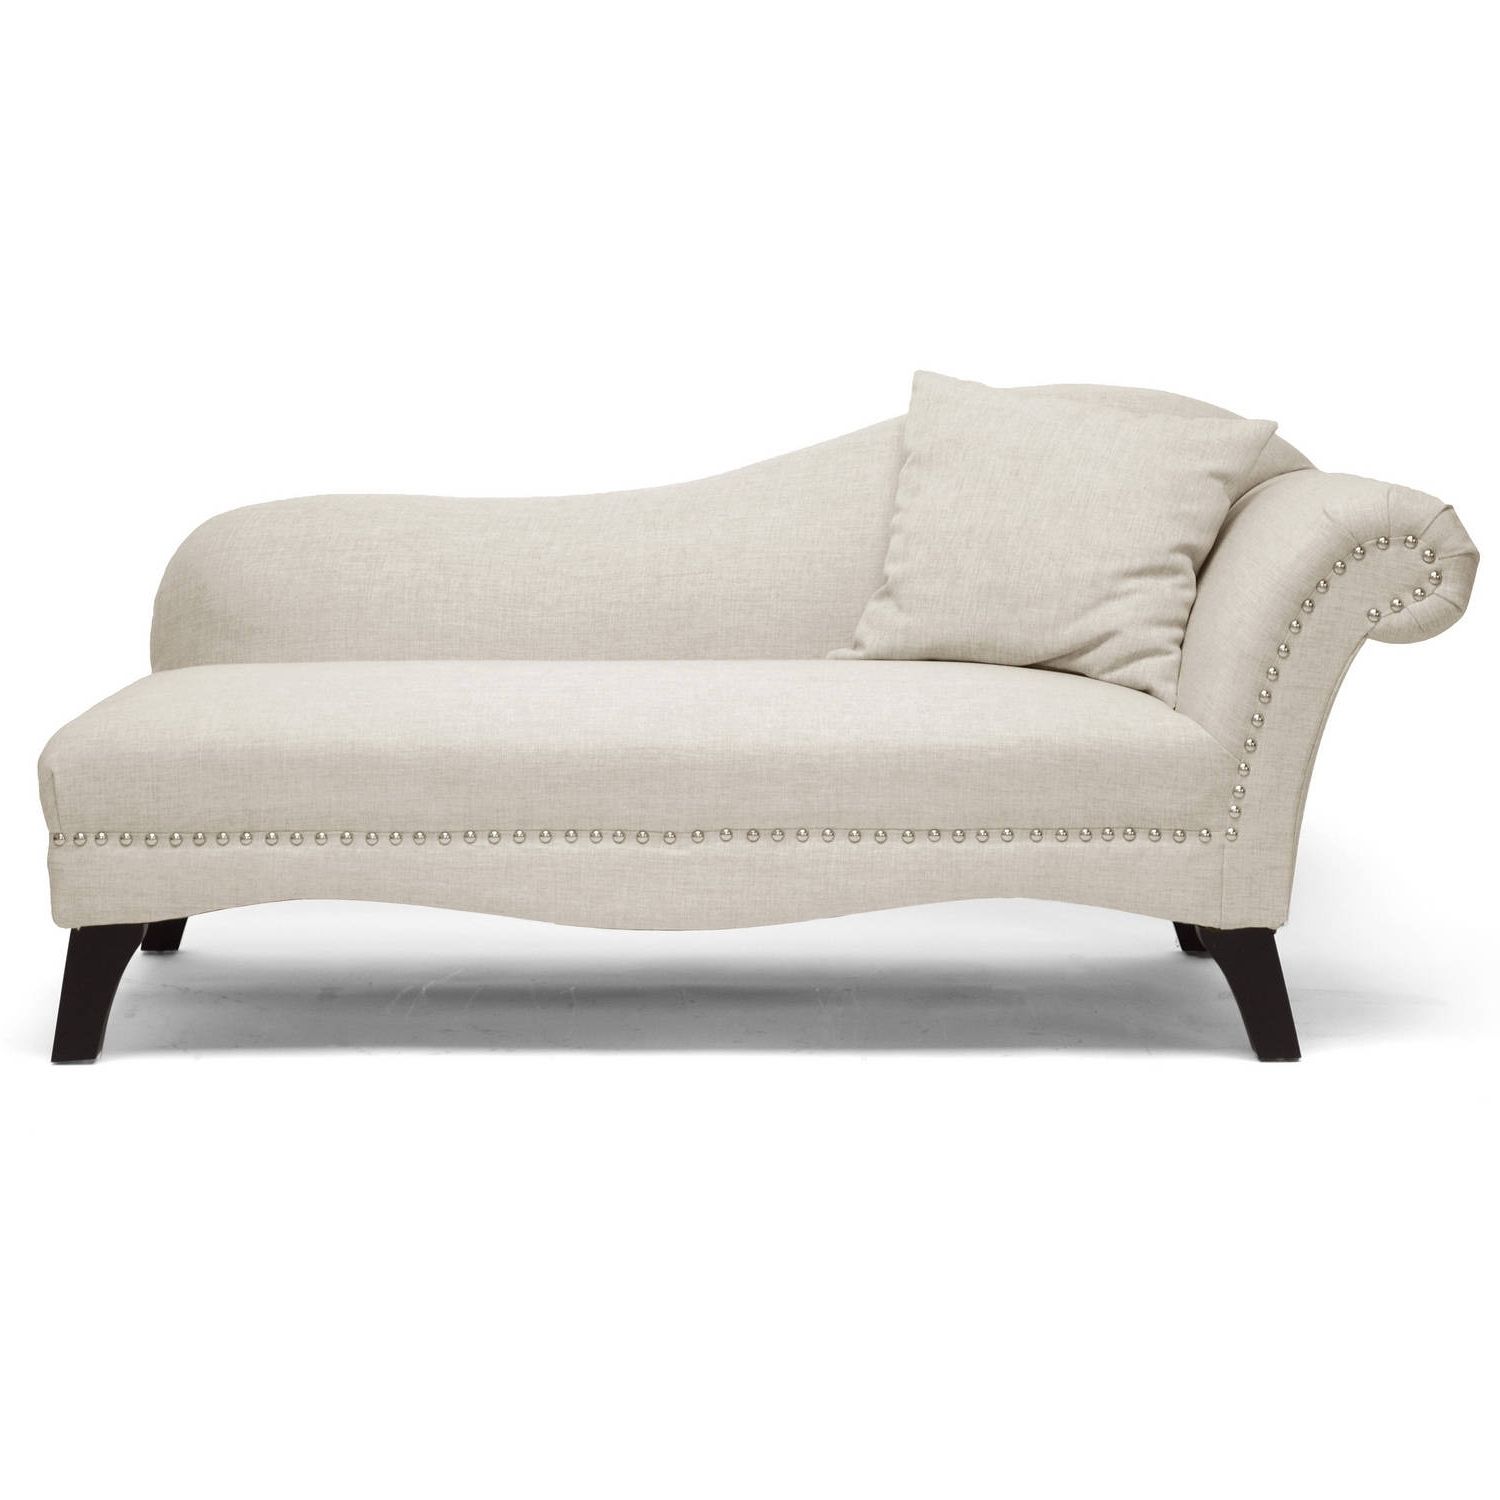 Chaise Lounge Benchs Within Well Known Chaise Lounges – Walmart (View 3 of 15)